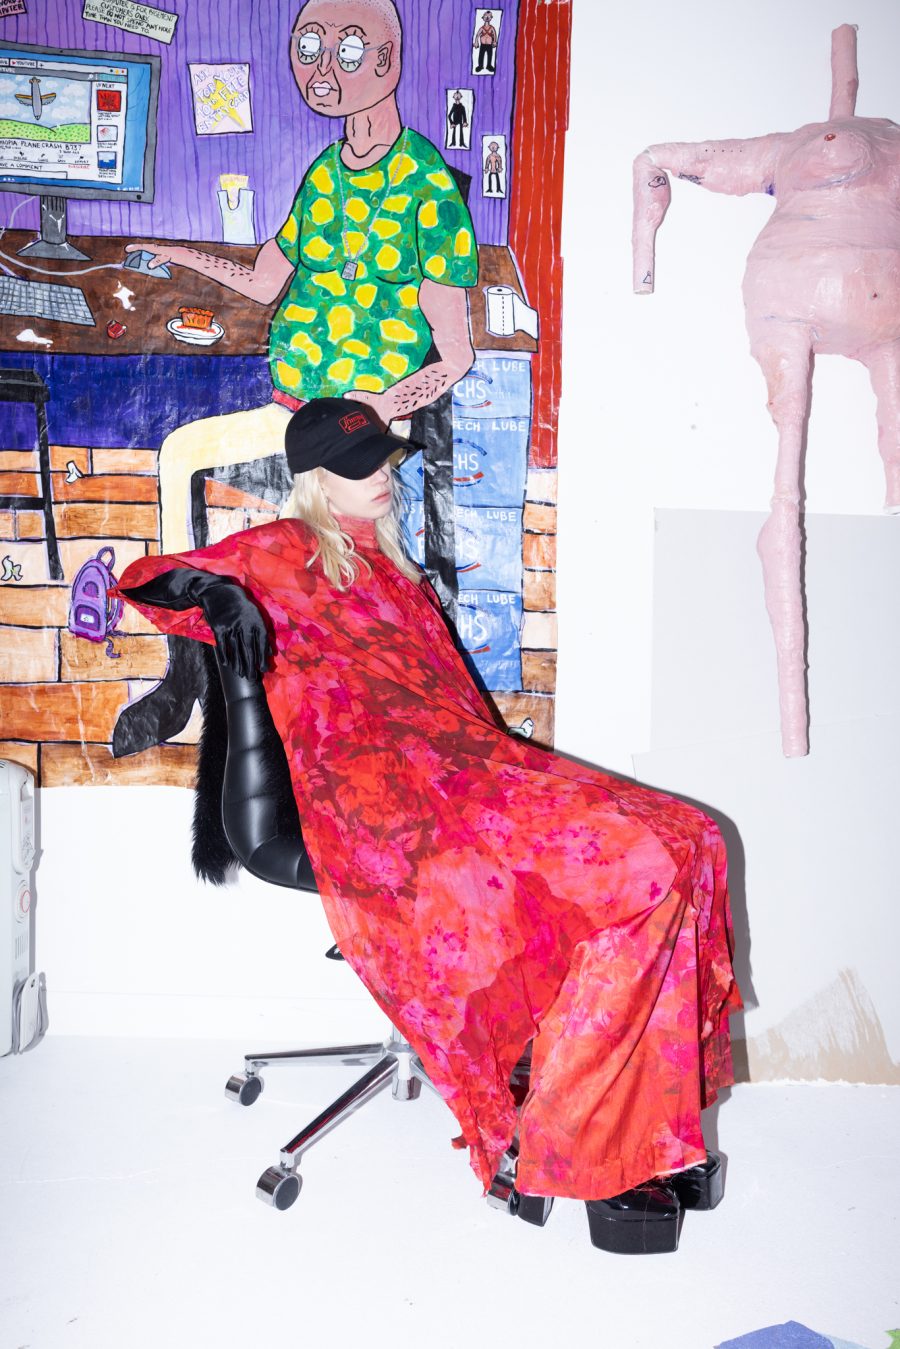 A person in a cap, red floral dress and platform shoes. They're sitting on a desk chair in front of some art.